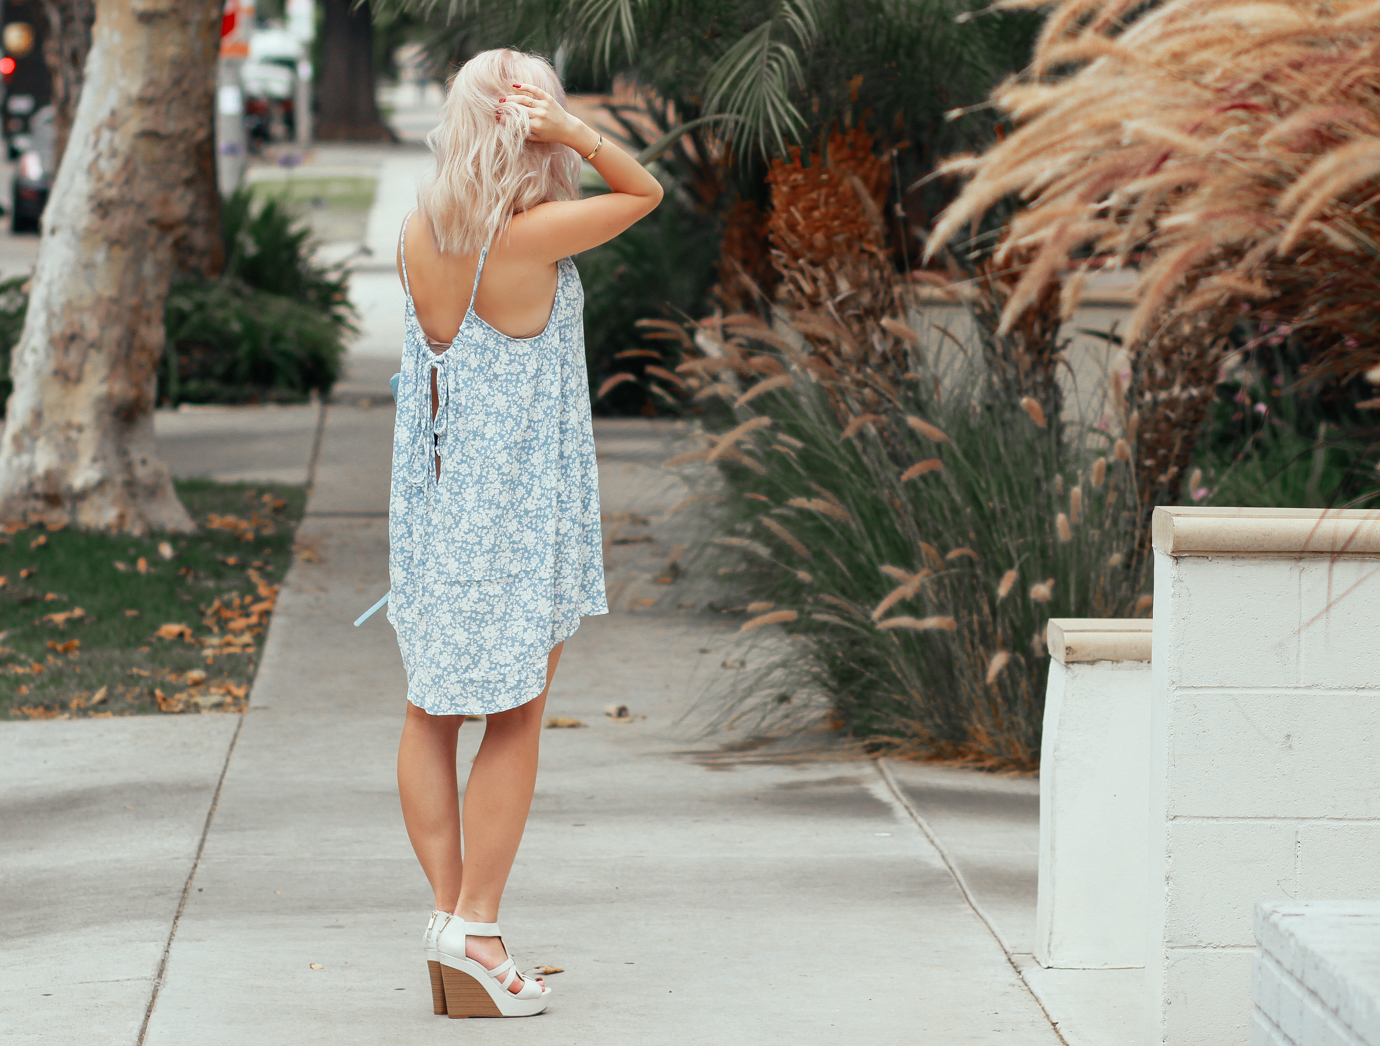 Blondie in the City | The Perfect Summer Dress | Blue and White Flowy Summer Dress